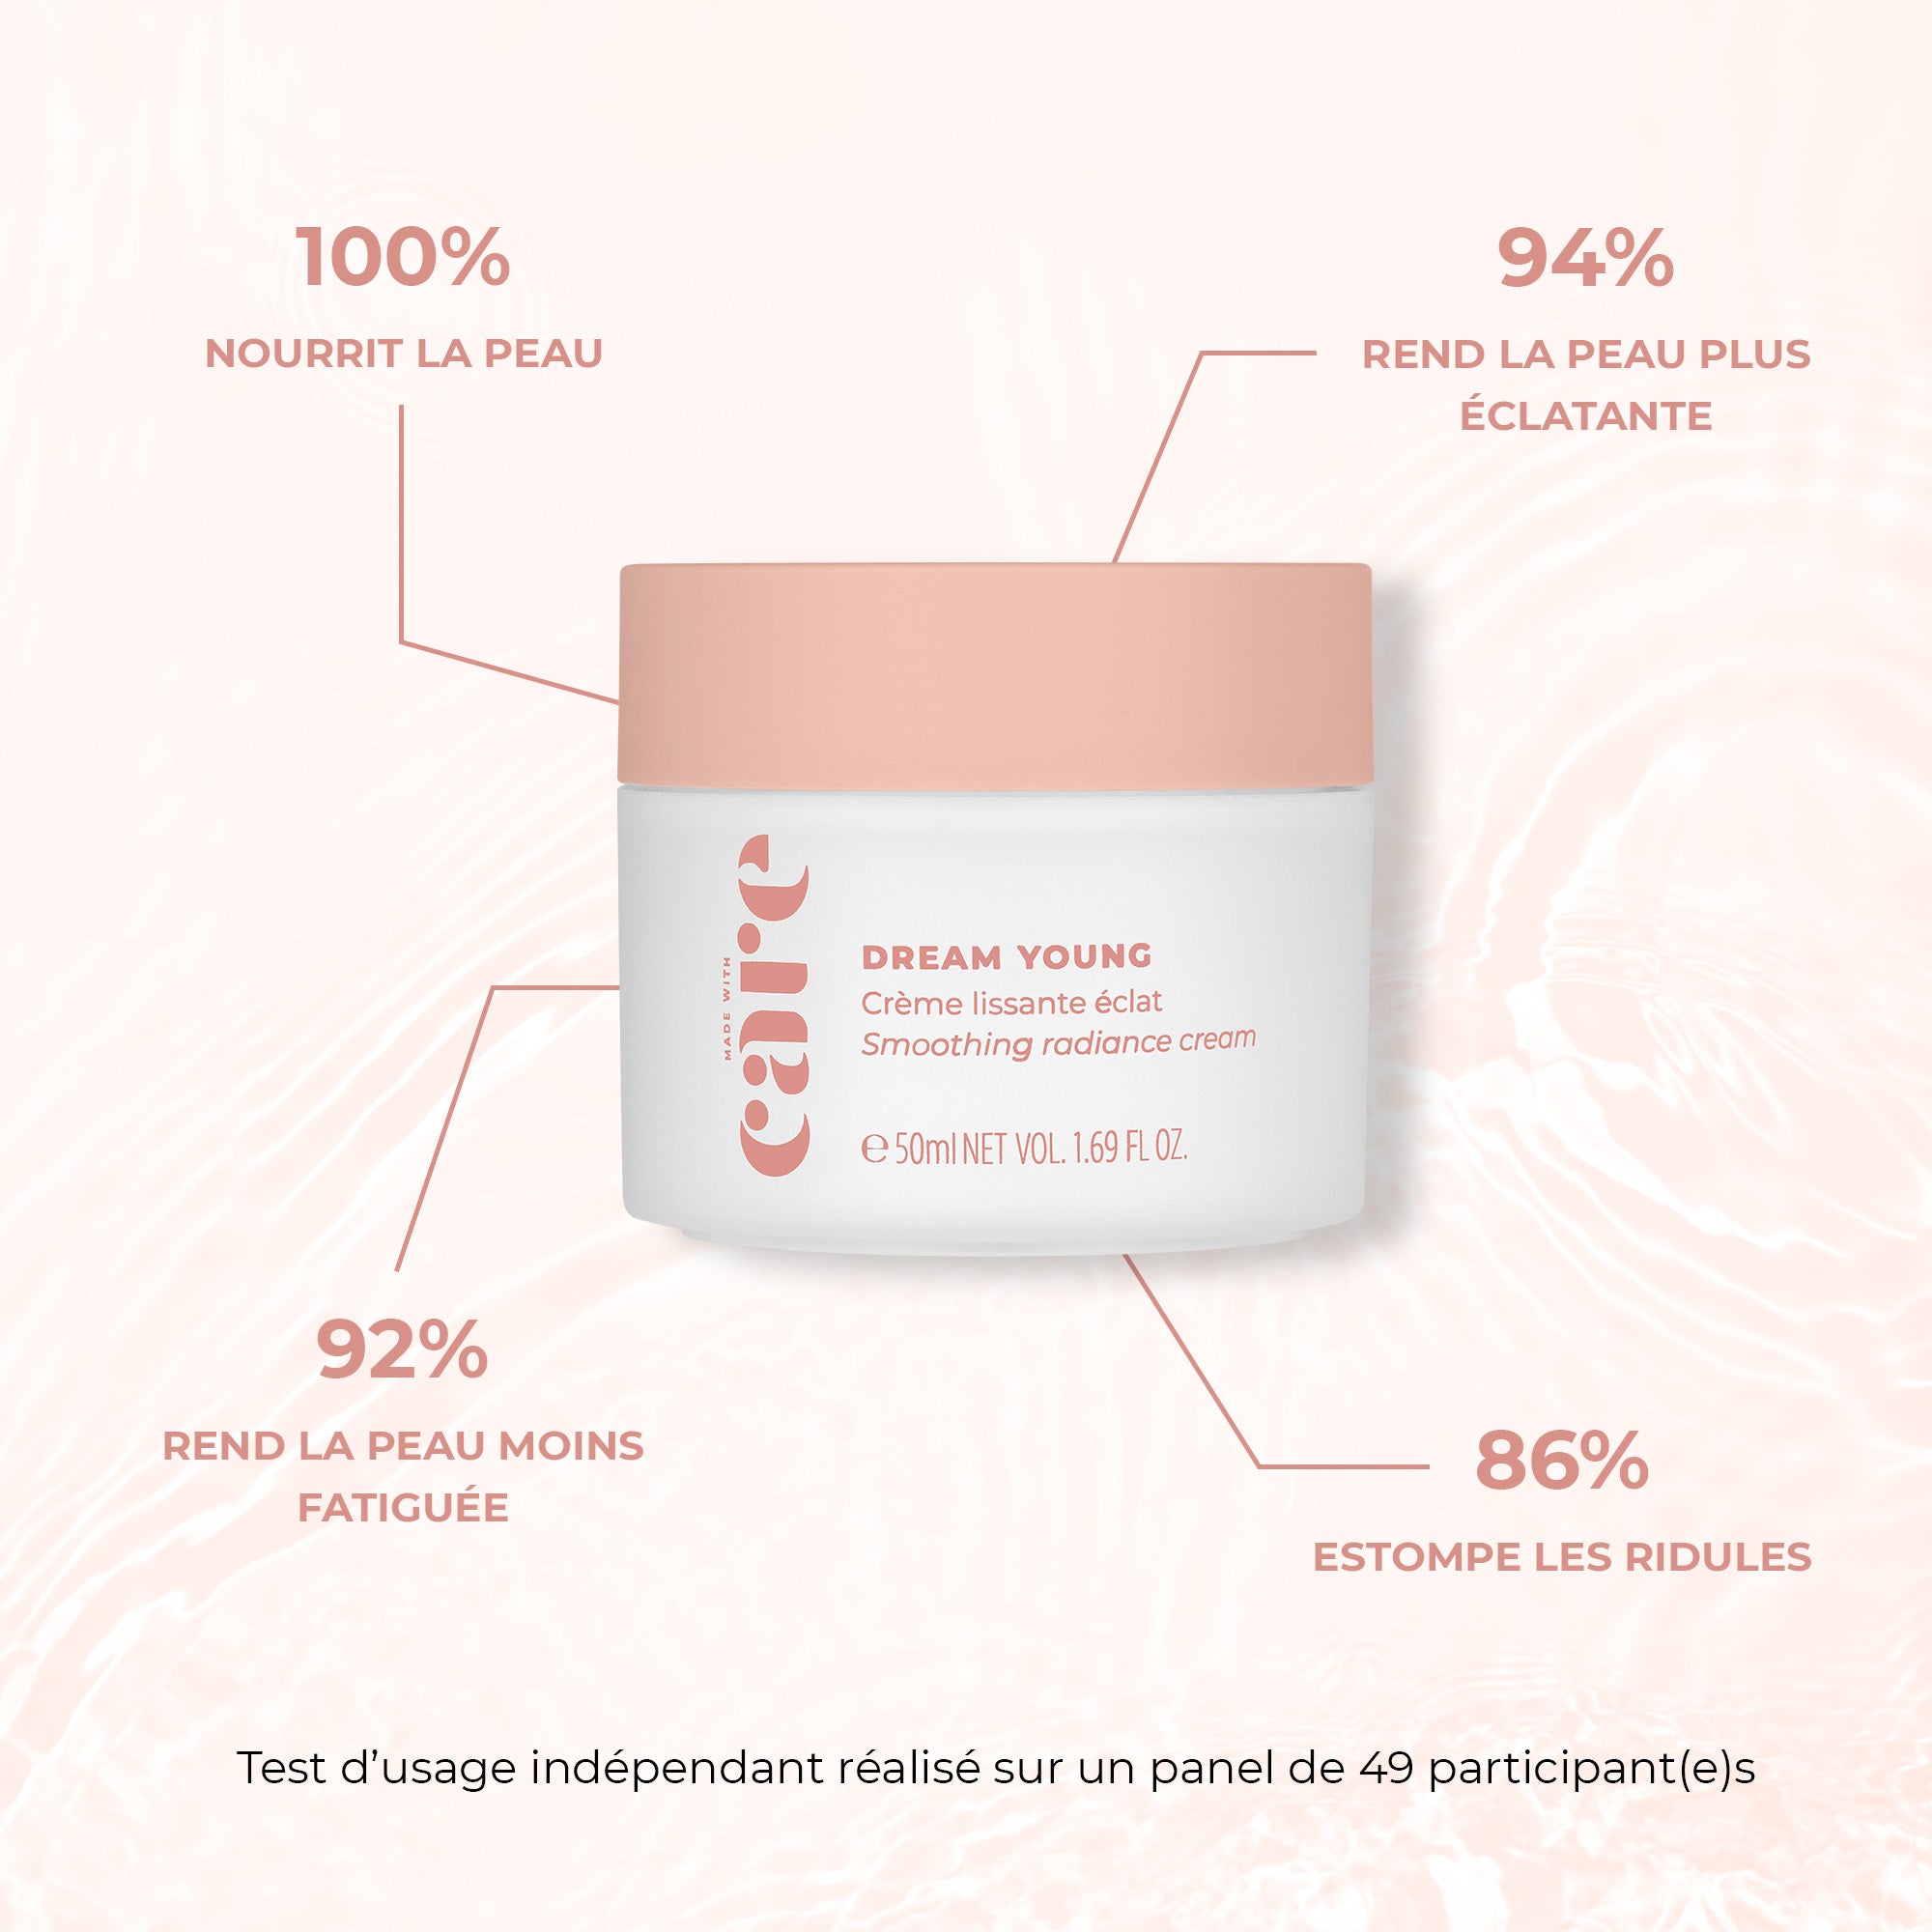 Dream Young - Smoothing Radiance Day and Night Cream